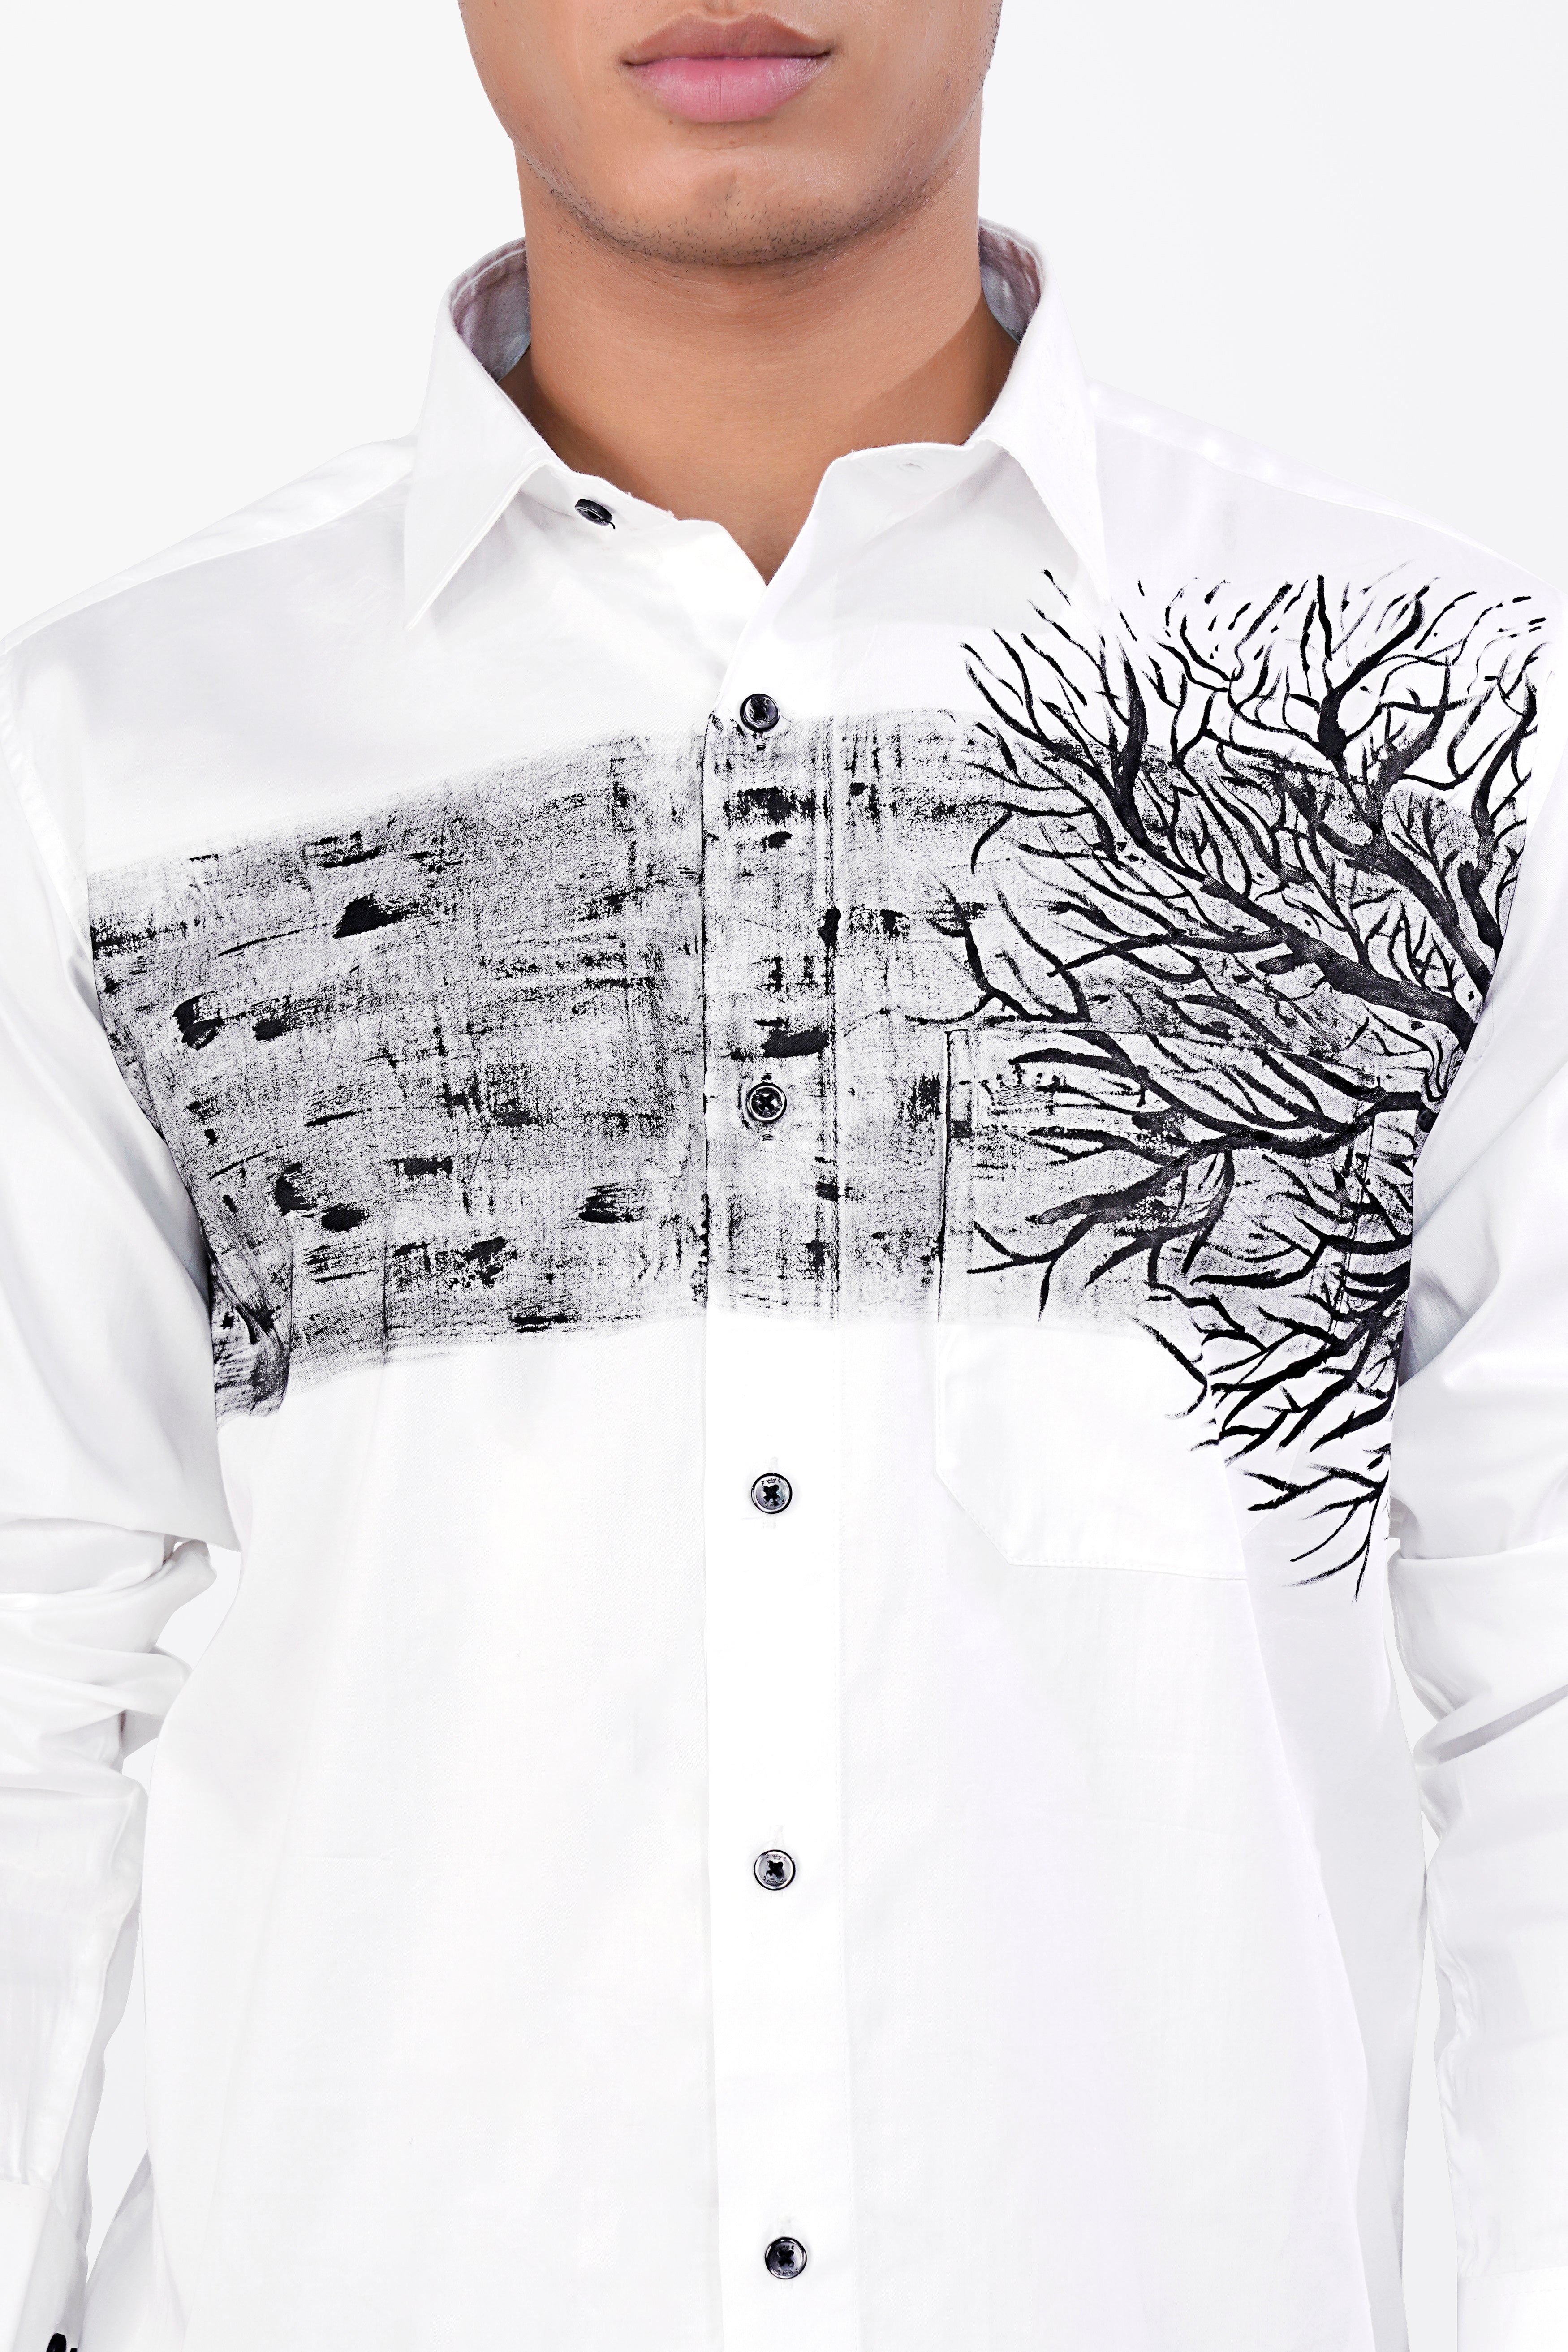 Bright White Hand Painted Royal Oxford Designer Shirt 8579-BLK-ART01-38, 8579-BLK-ART01-H-38, 8579-BLK-ART01-39, 8579-BLK-ART01-H-39, 8579-BLK-ART01-40, 8579-BLK-ART01-H-40, 8579-BLK-ART01-42, 8579-BLK-ART01-H-42, 8579-BLK-ART01-44, 8579-BLK-ART01-H-44, 8579-BLK-ART01-46, 8579-BLK-ART01-H-46, 8579-BLK-ART01-48, 8579-BLK-ART01-H-48, 8579-BLK-ART01-50, 8579-BLK-ART01-H-50, 8579-BLK-ART01-52, 8579-BLK-ART01-H-52